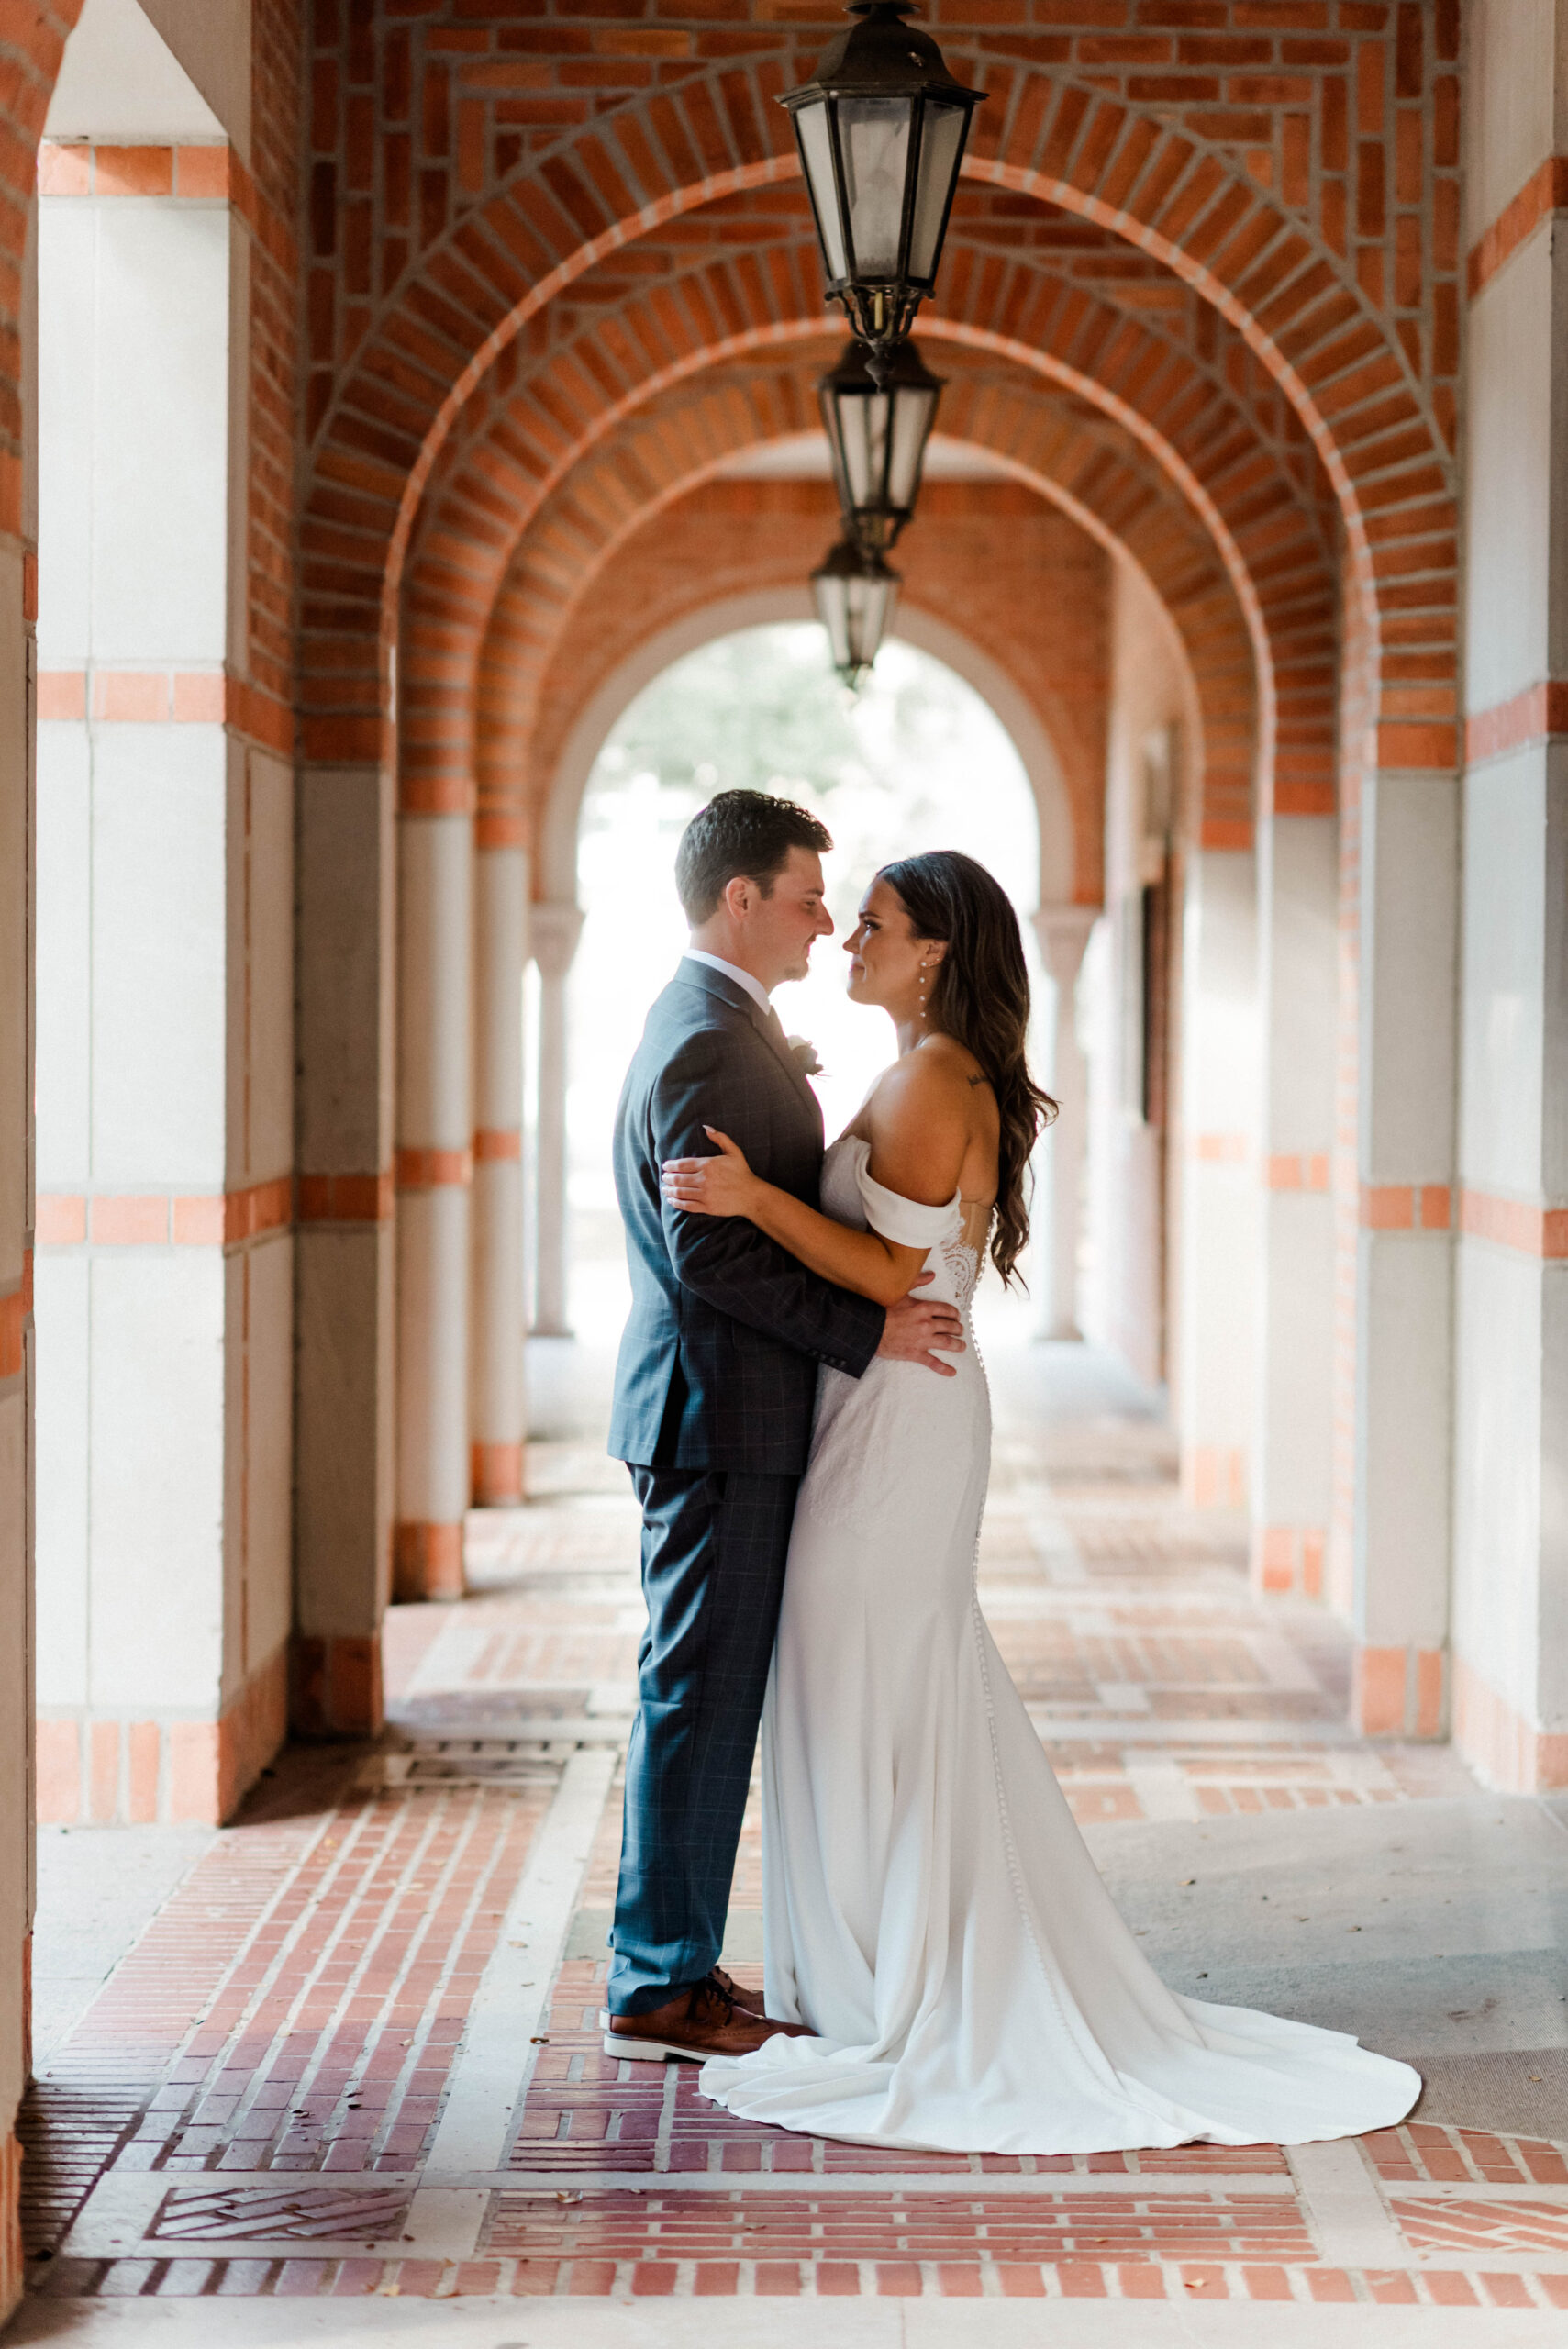 Hannah and Michael's Wedding at Rice University in Houston, Texas with Rachel Driskell Photography